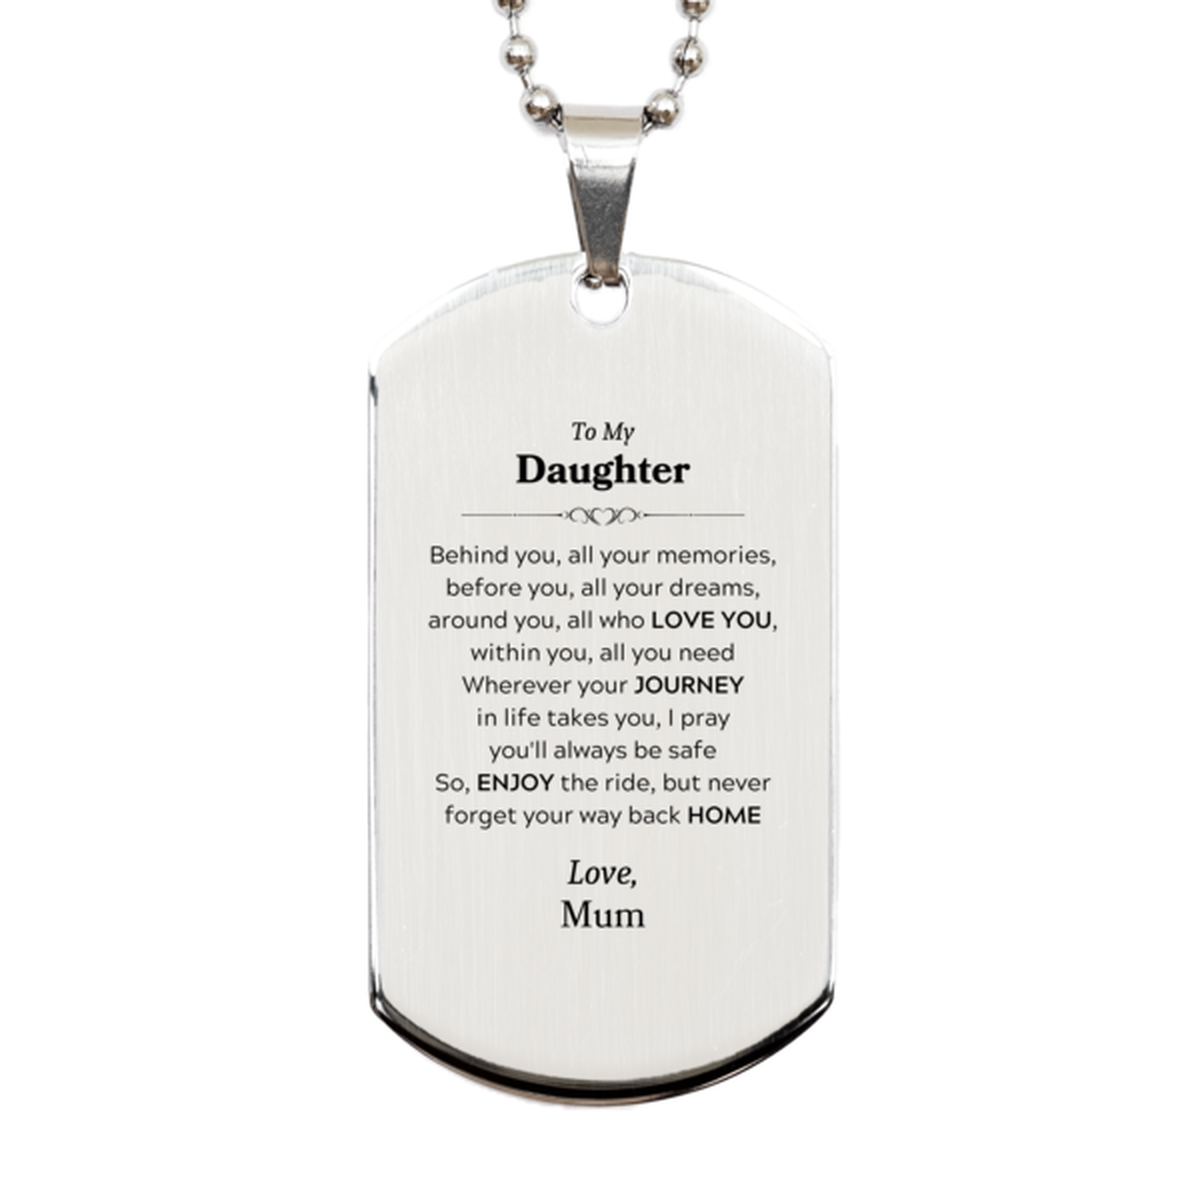 To My Daughter Graduation Gifts from Mum, Daughter Silver Dog Tag Christmas Birthday Gifts for Daughter Behind you, all your memories, before you, all your dreams. Love, Mum